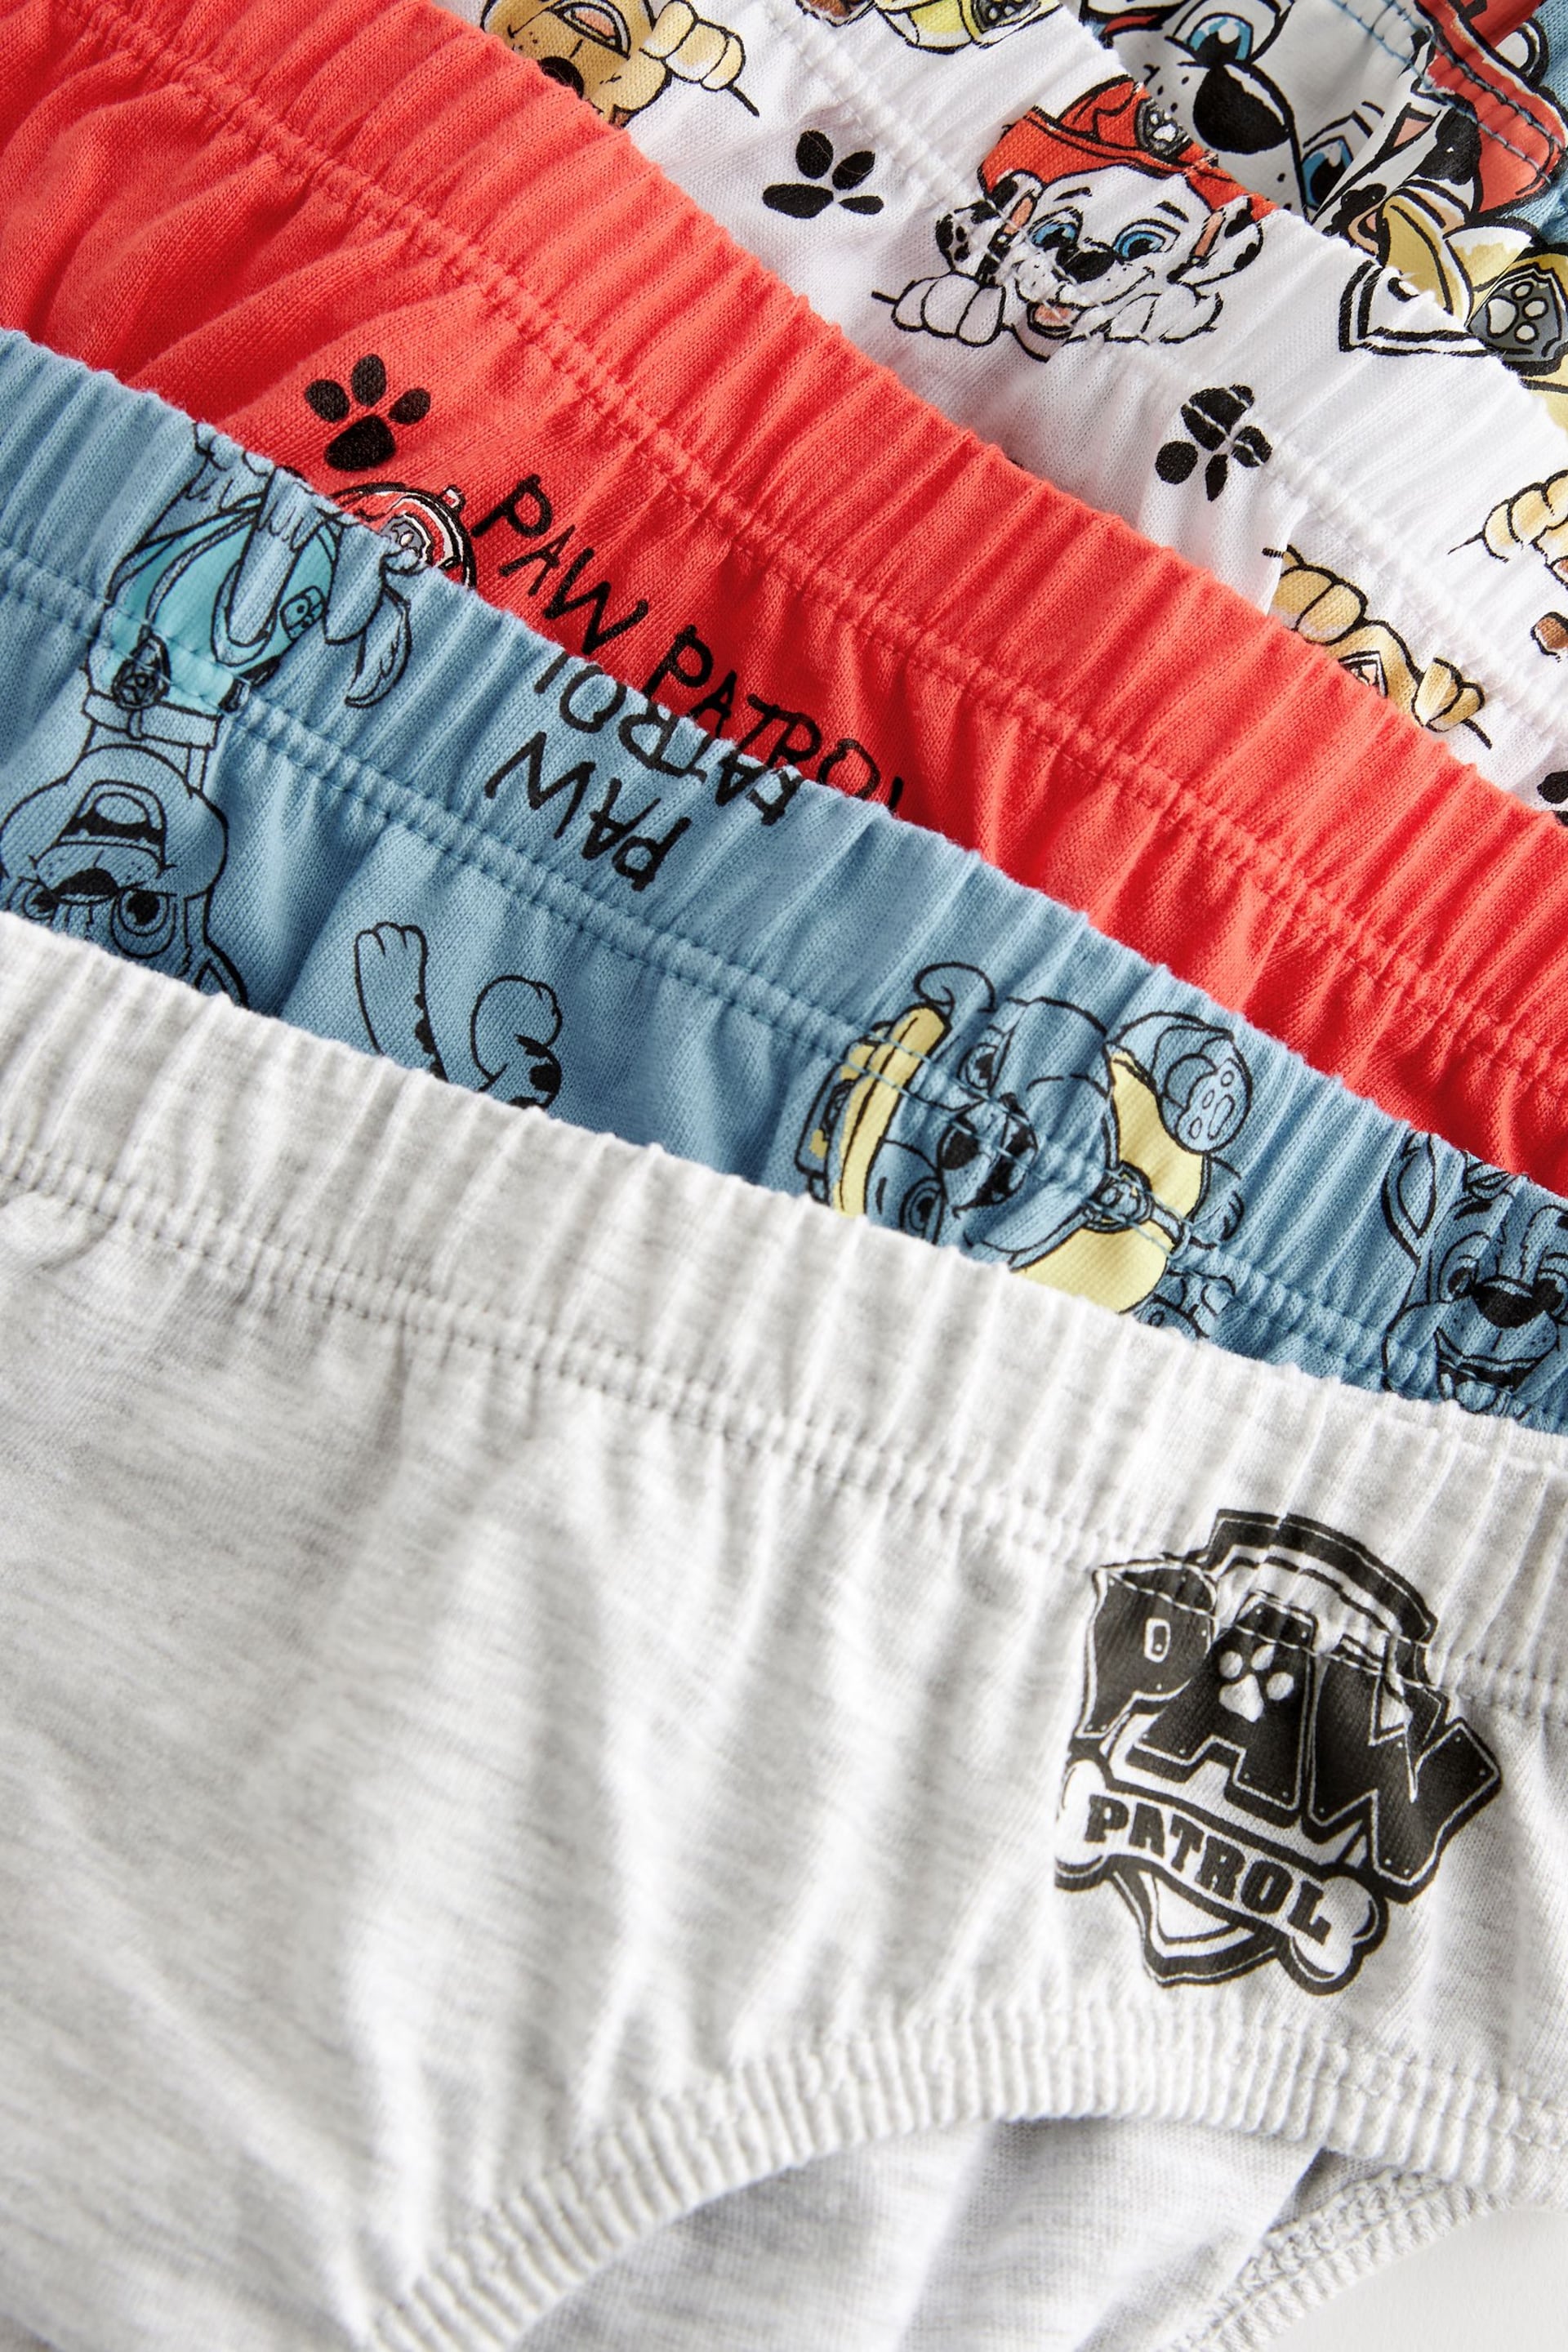 Paw Patrol Briefs 5 Pack (1.5-10yrs) - Image 8 of 8